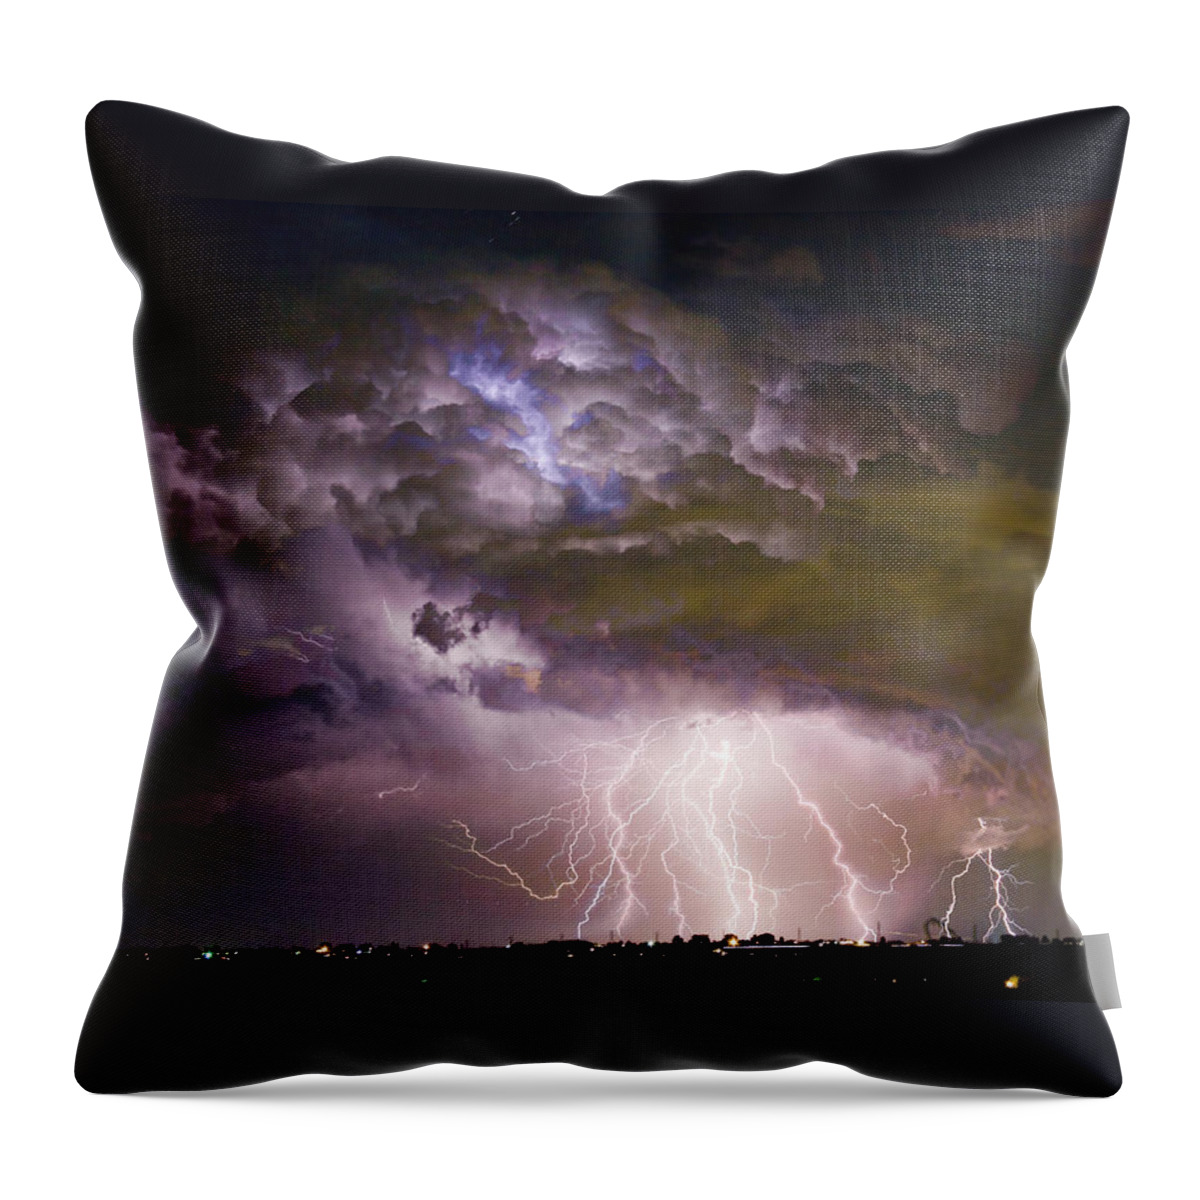 Colorado Lightning Throw Pillow featuring the photograph Highway 52 Storm Cell - Two and half Minutes Lightning Strikes by James BO Insogna